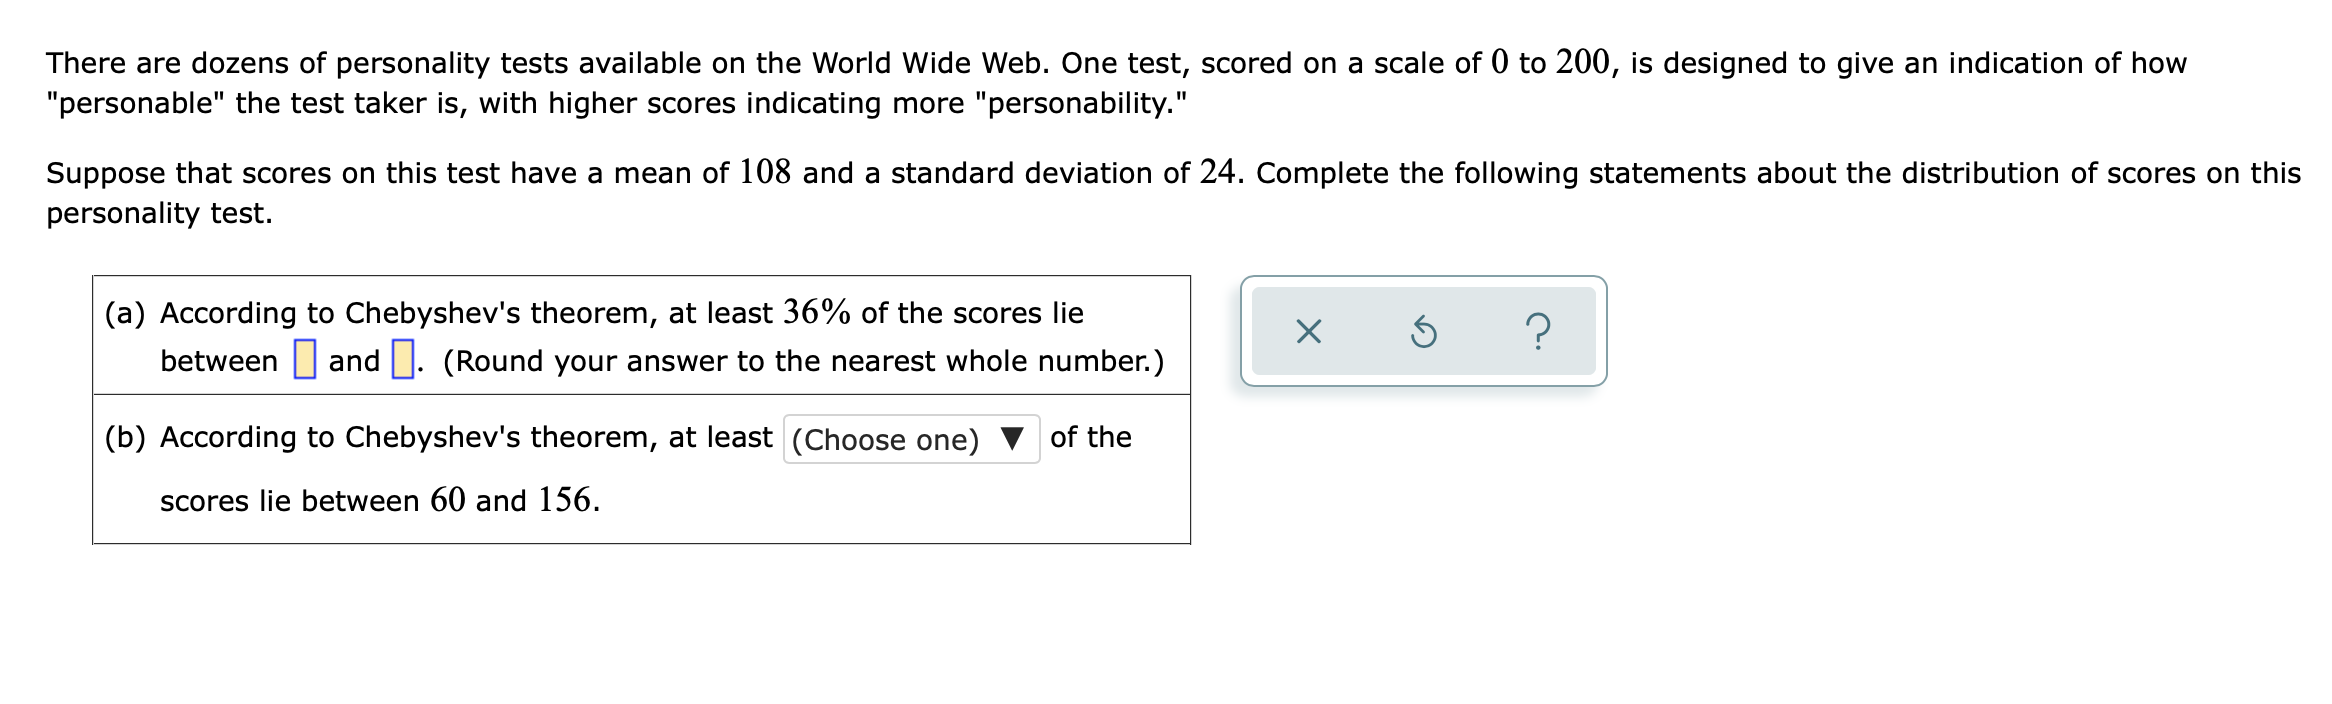 There Are Dozens Of Personality Tests Available On The World Wide Web One Test Scored On A Scale Of 0 To 200 Is Desig 1